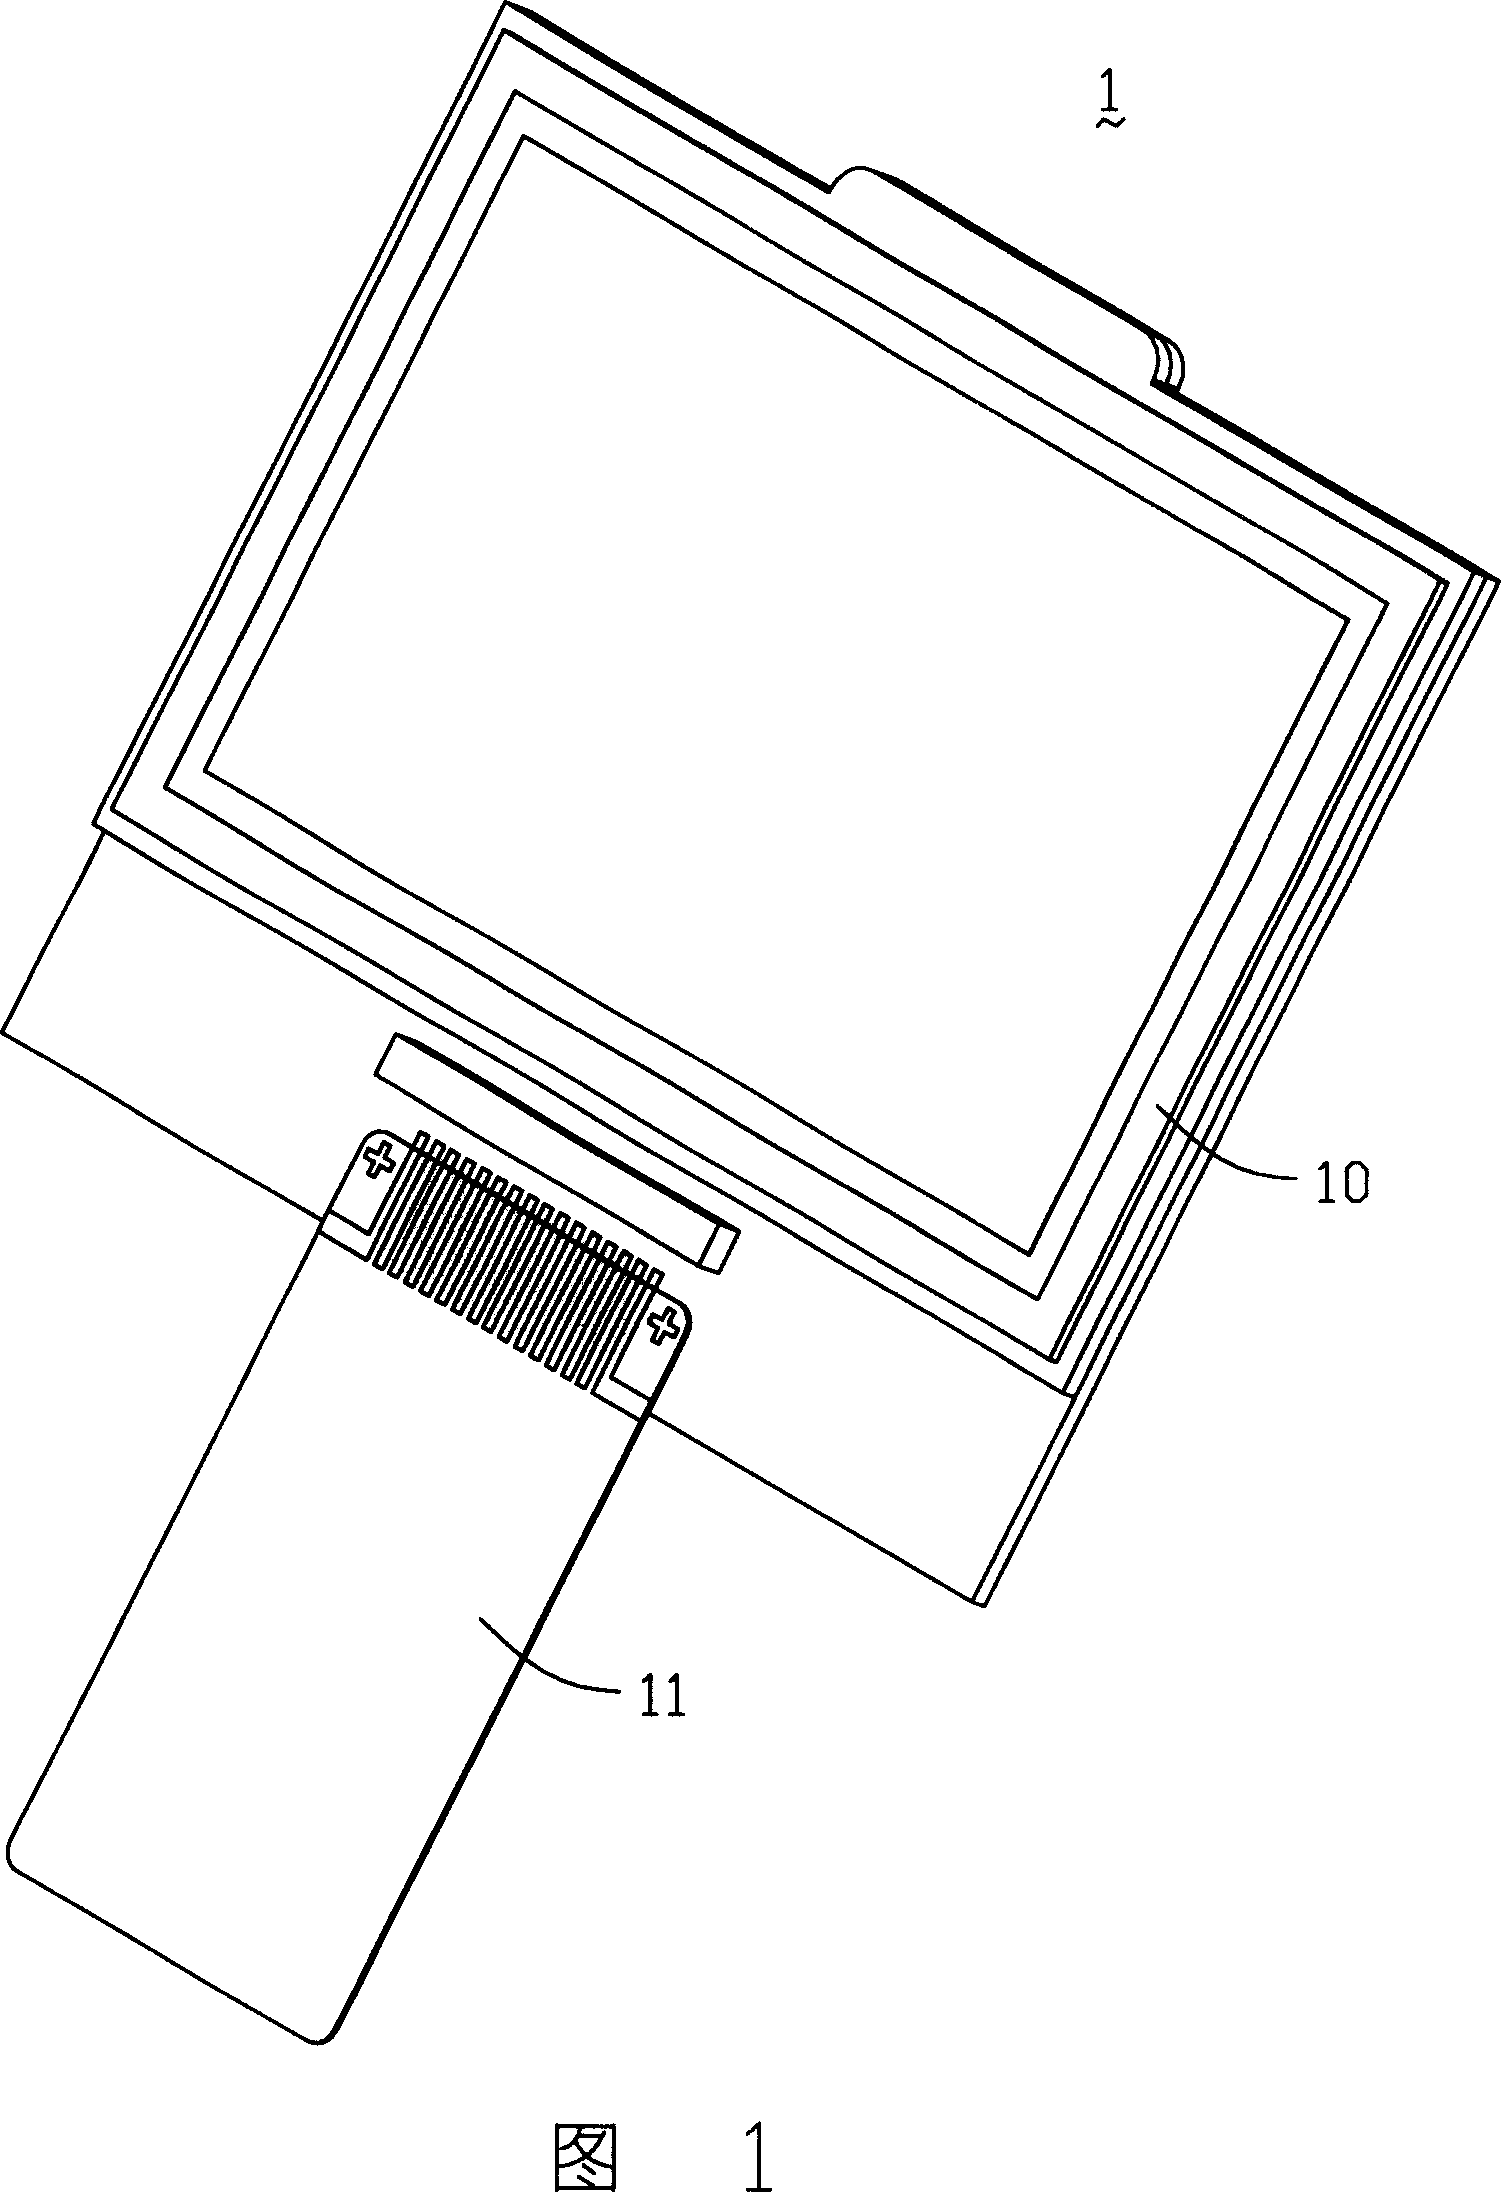 Flexible circuit board and LCD device